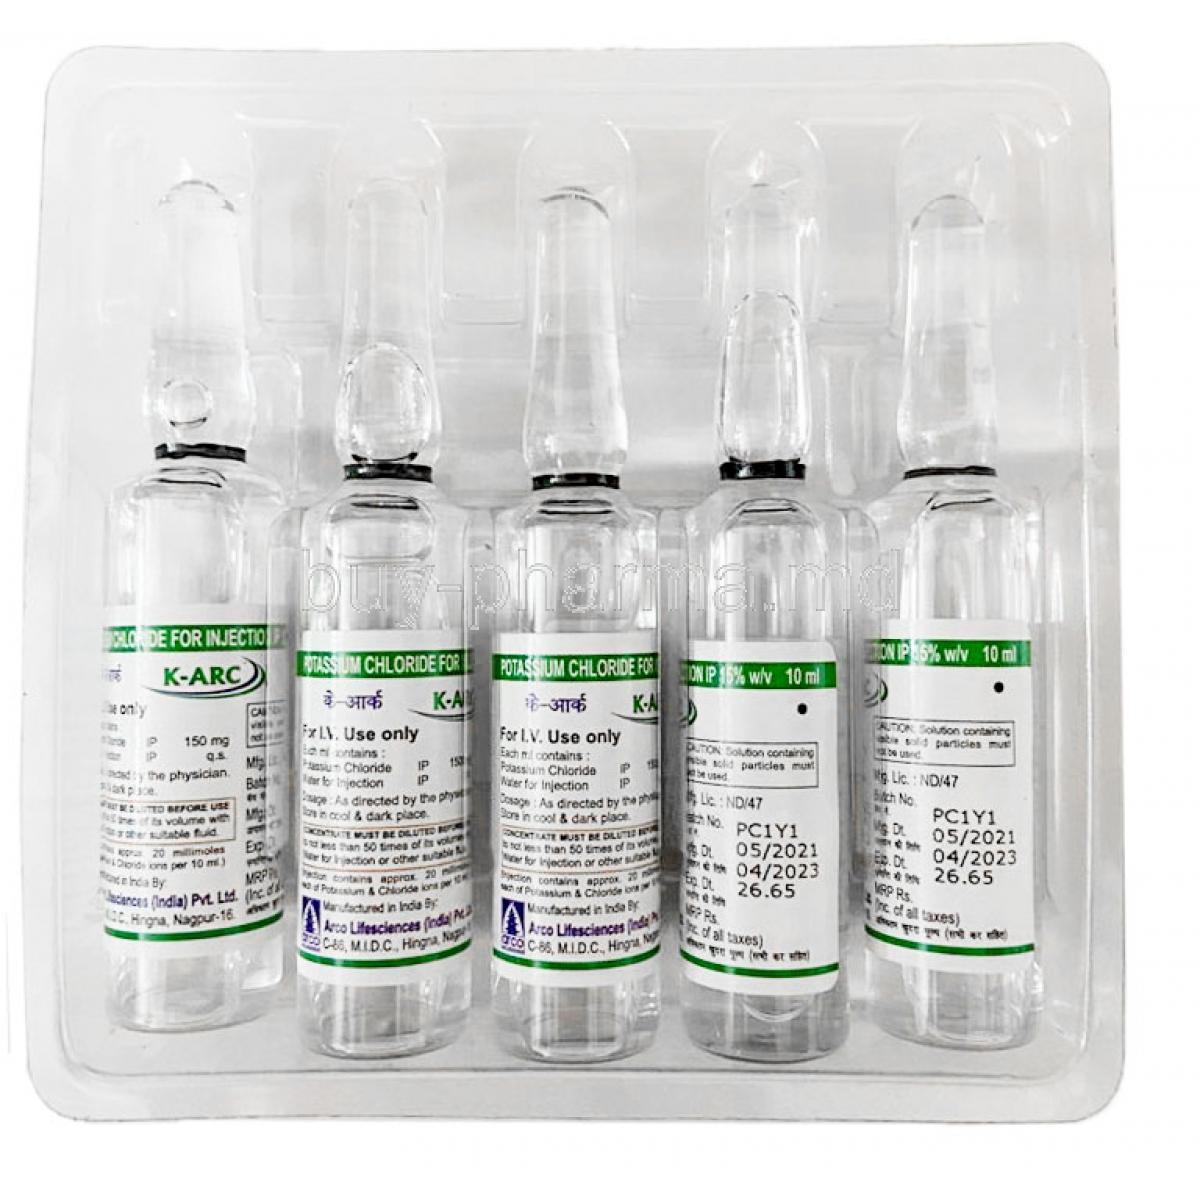 K-Arc Injection, Potassium Chloride 150mg, Injection 10ml, Arco lifesciences (india) pvt ltd, Package